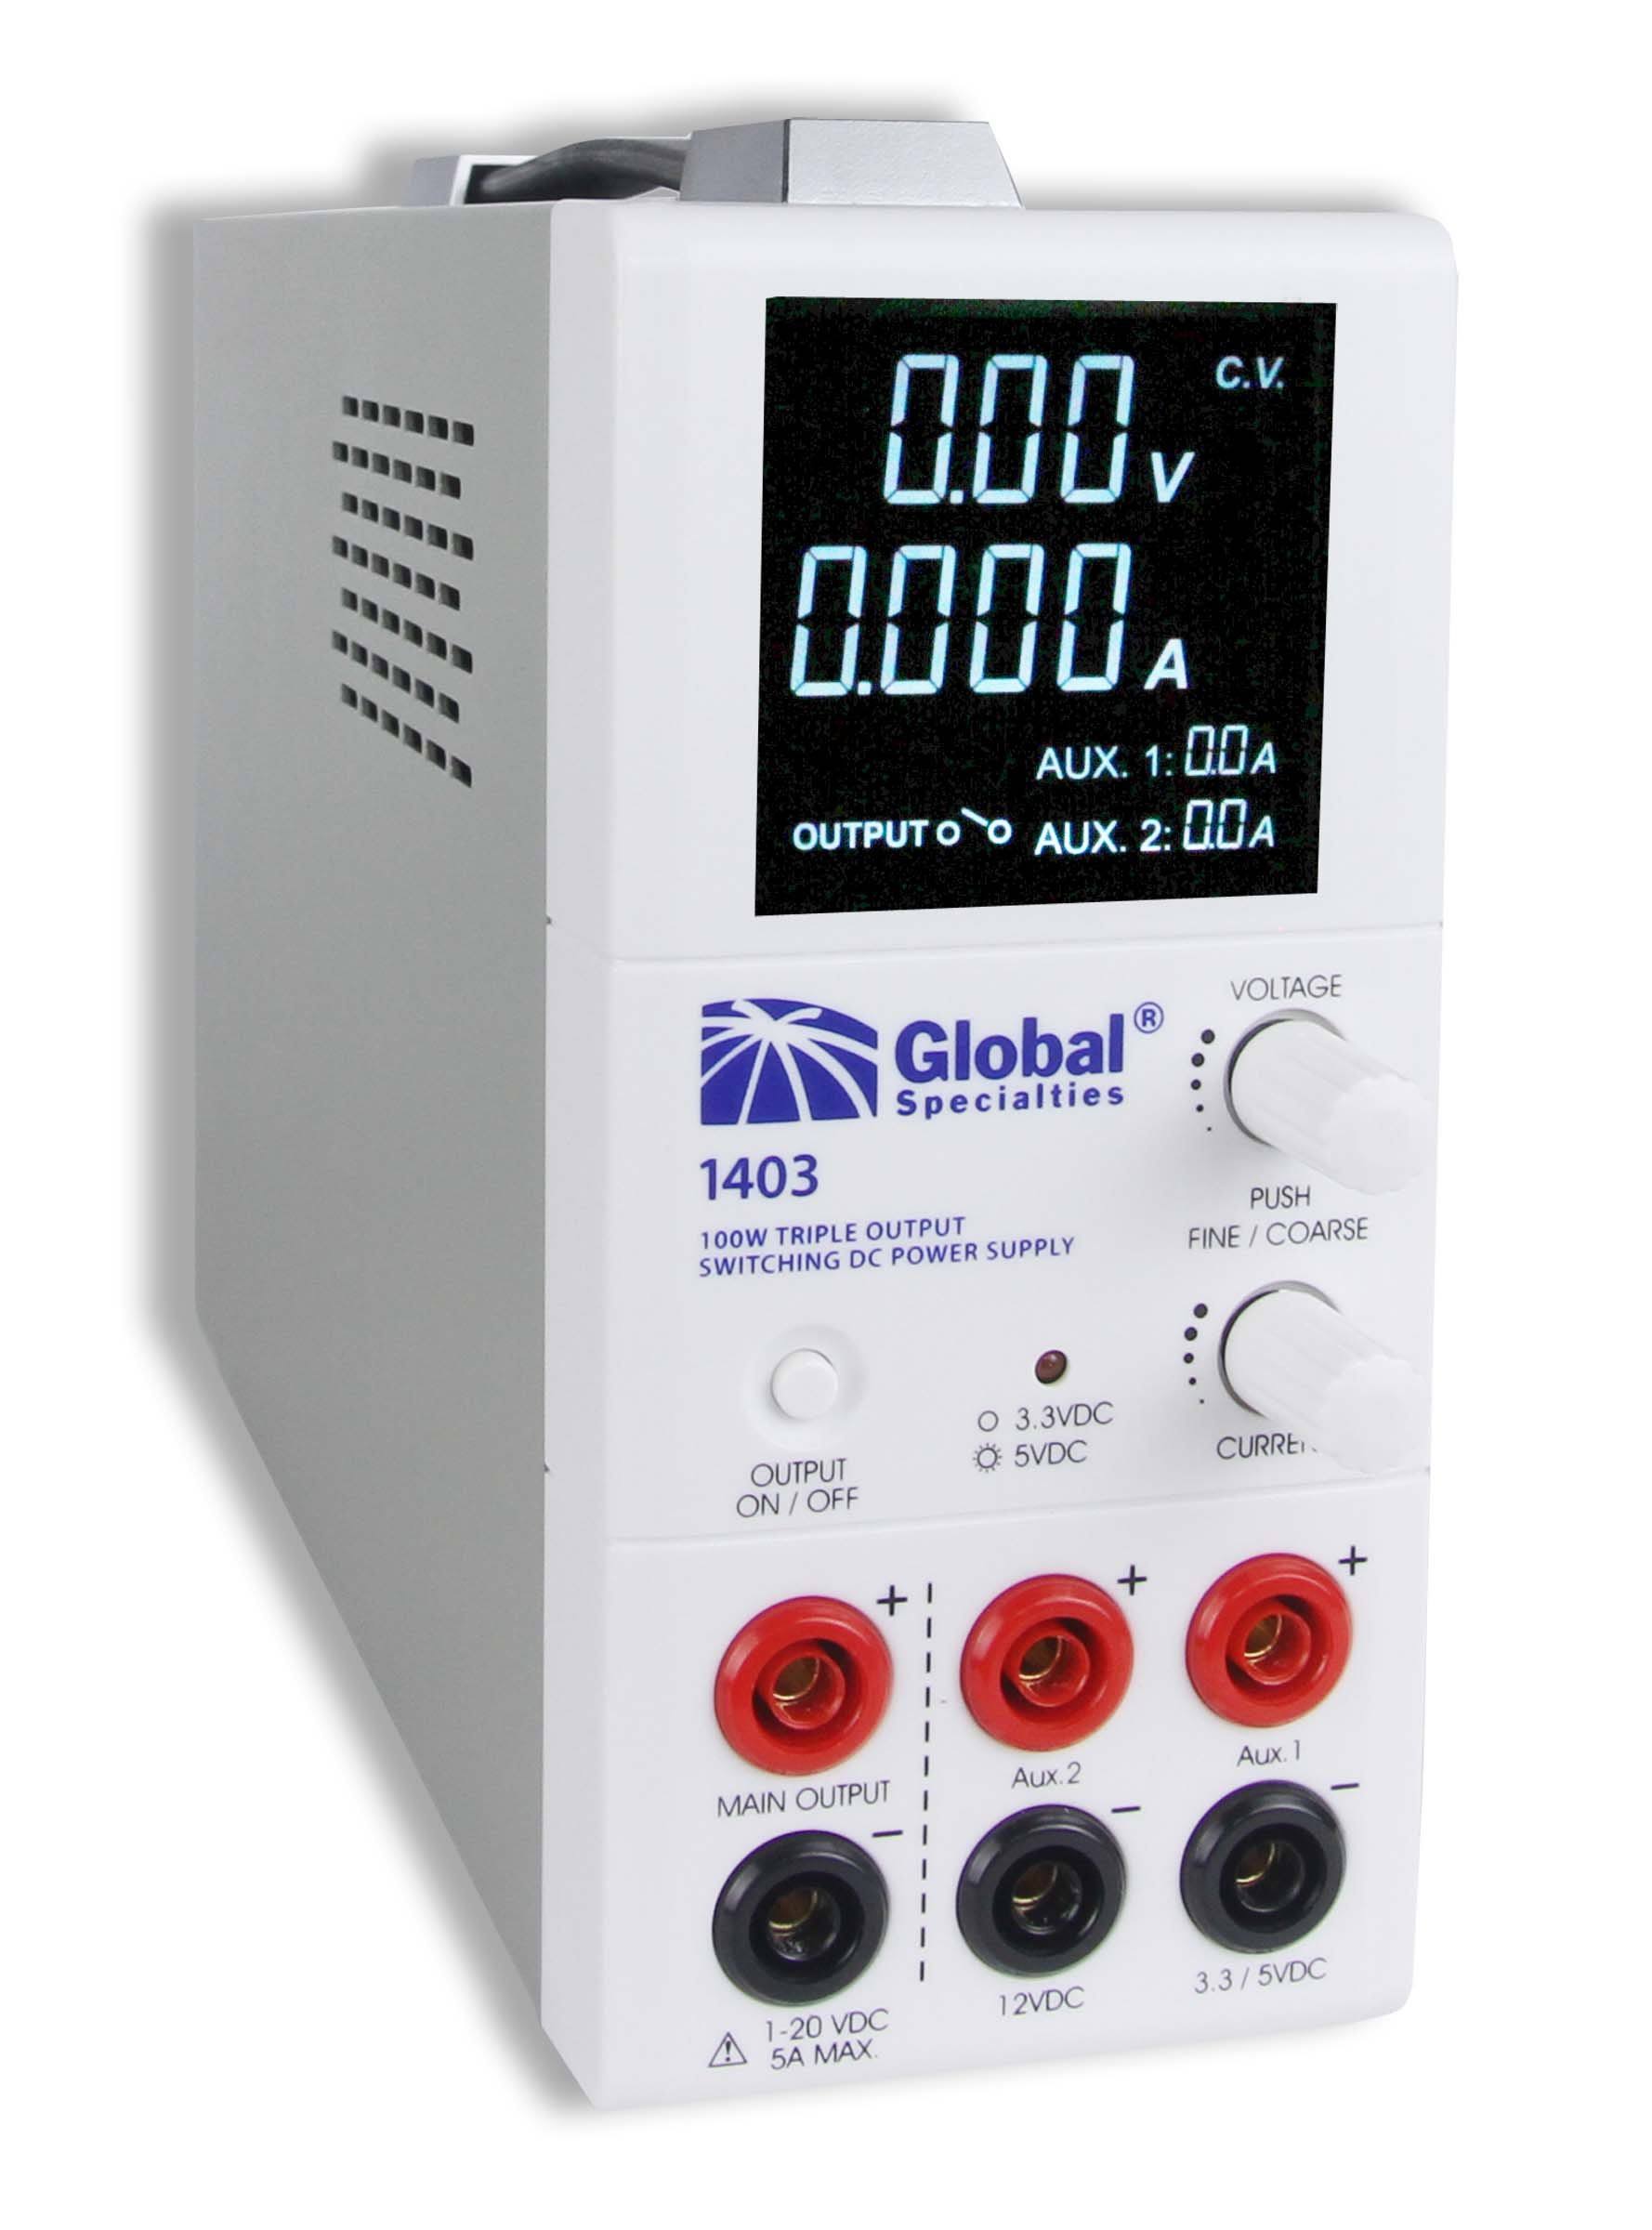 Global Specialties 1403 Triple Output Switching DC Power Supply - My